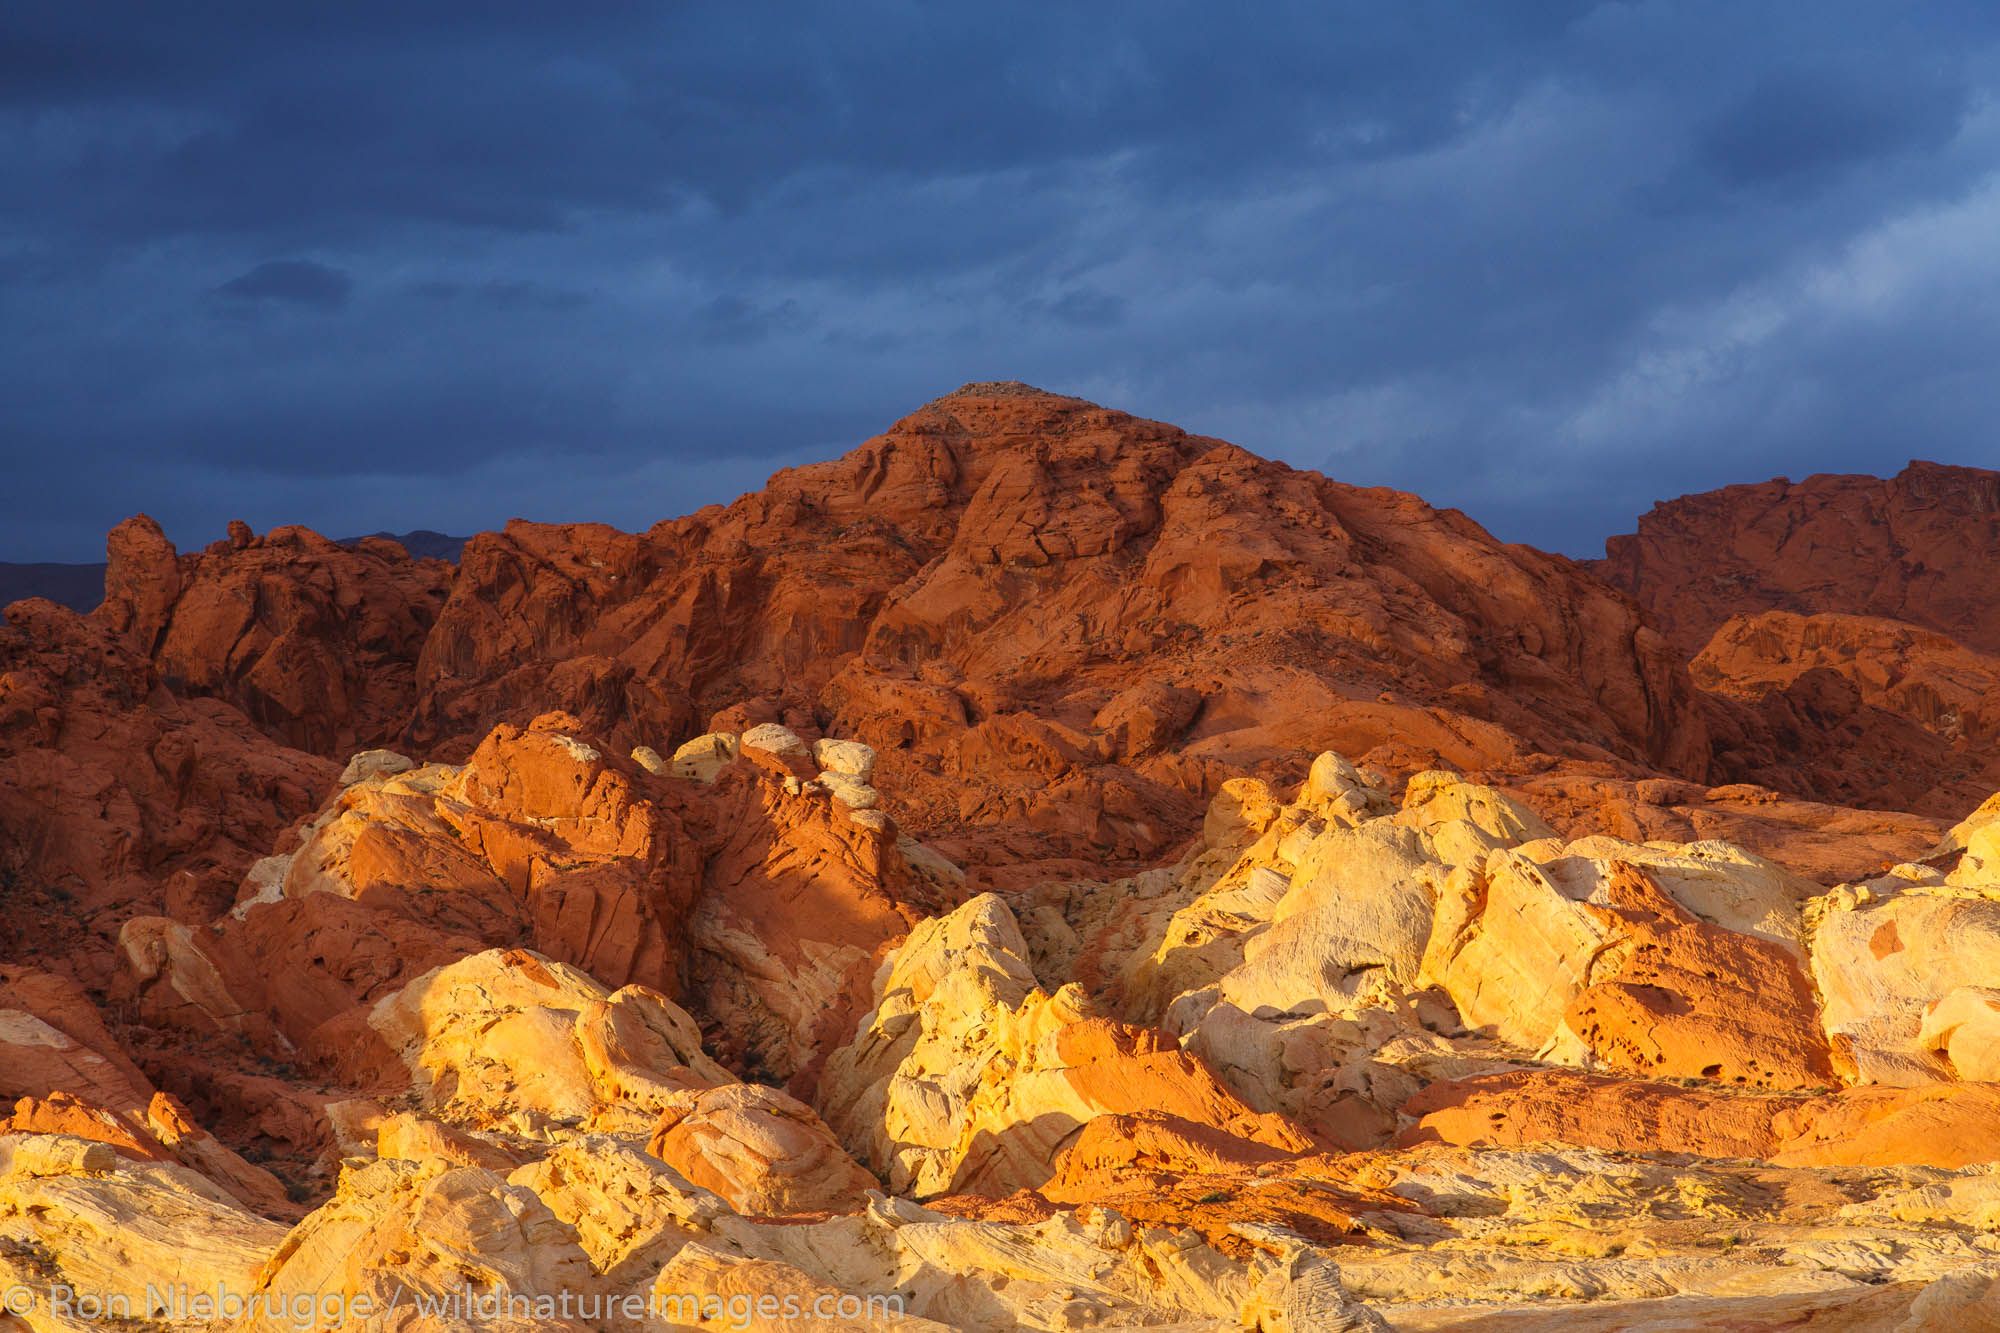 Sunrise over Silica Dome-Fire Canyon, Valley of Fire State Park, about 1 hour from Las Vegas, Nevada